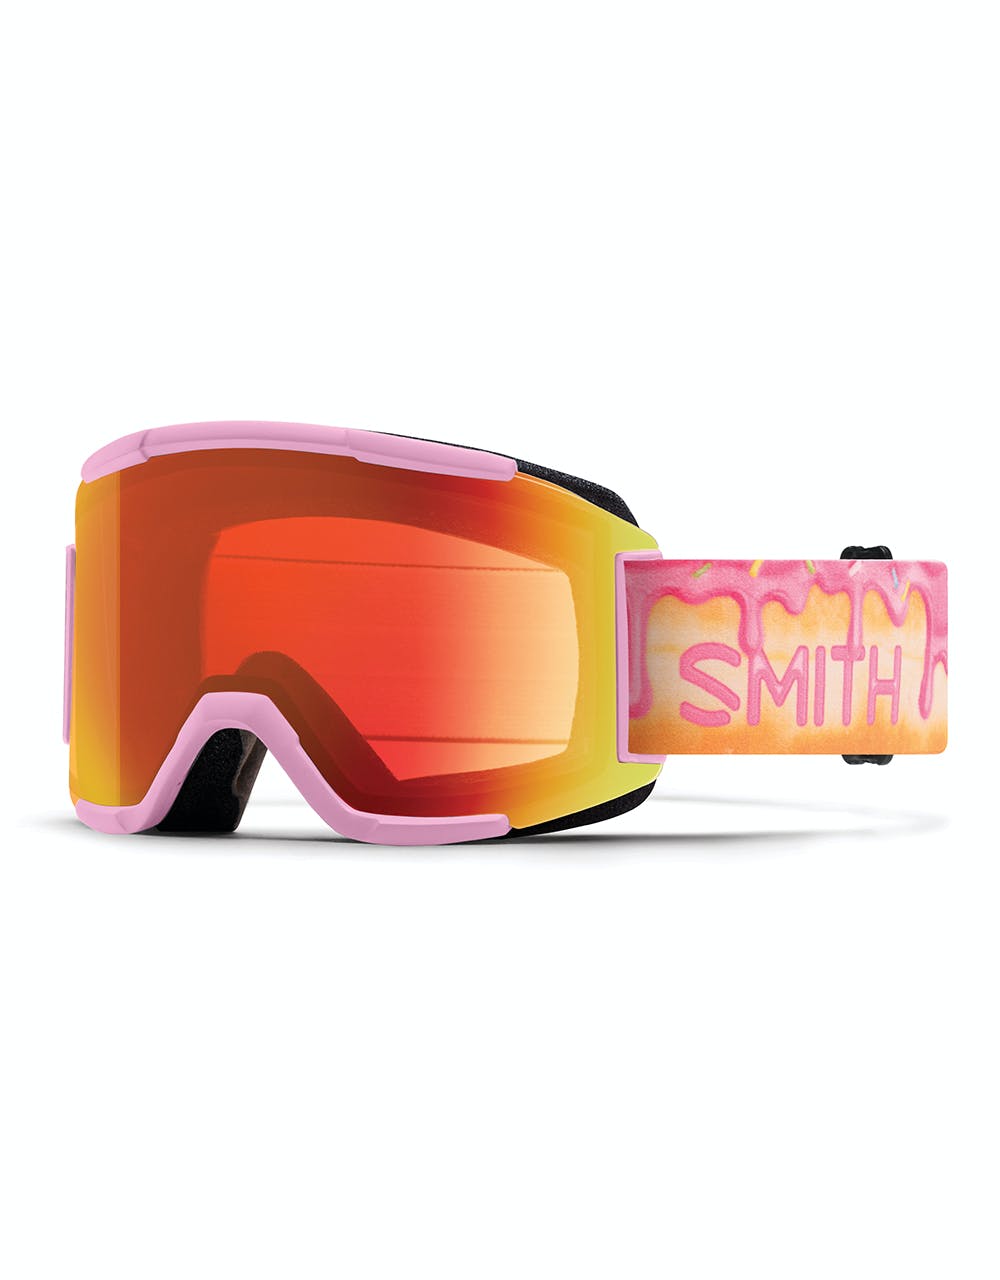 Smith Squad Snowboard Goggles - Gus Kenworthy/Everyday Red Mirror